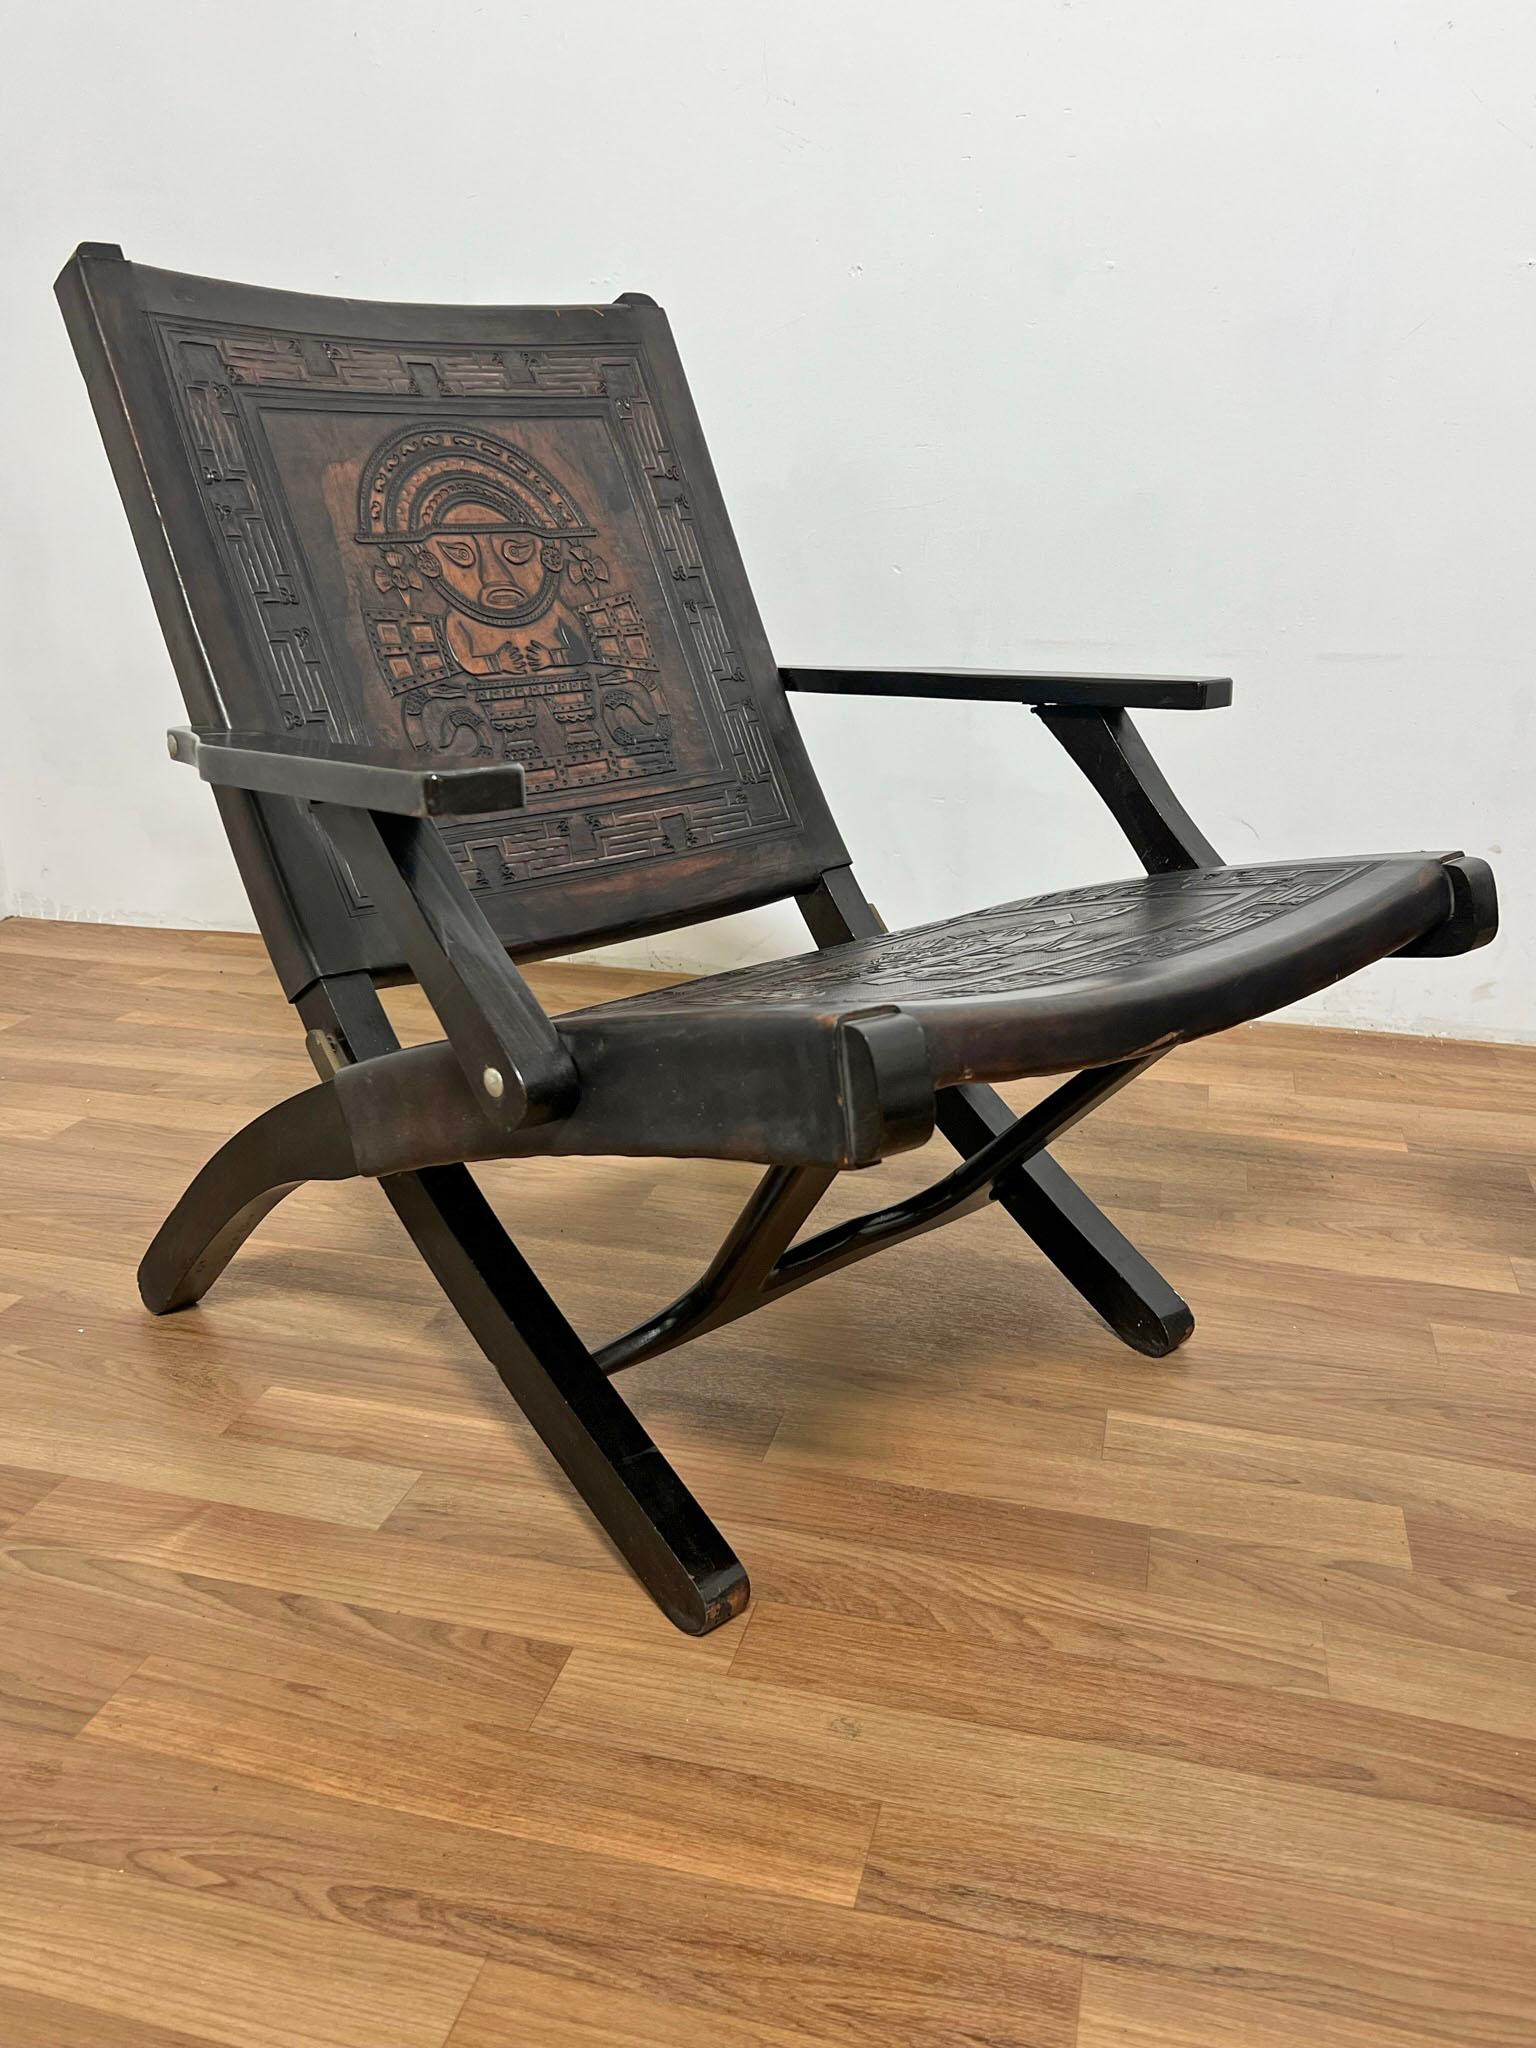 Pair of folding leather safari arm lounge chairs by Angel Pazmino for Muebles De Estilo of Ecuador, circa 1960s. These feature leather seats and backs adorned with the Incan hand tooling typical of Pazmino's designs.

